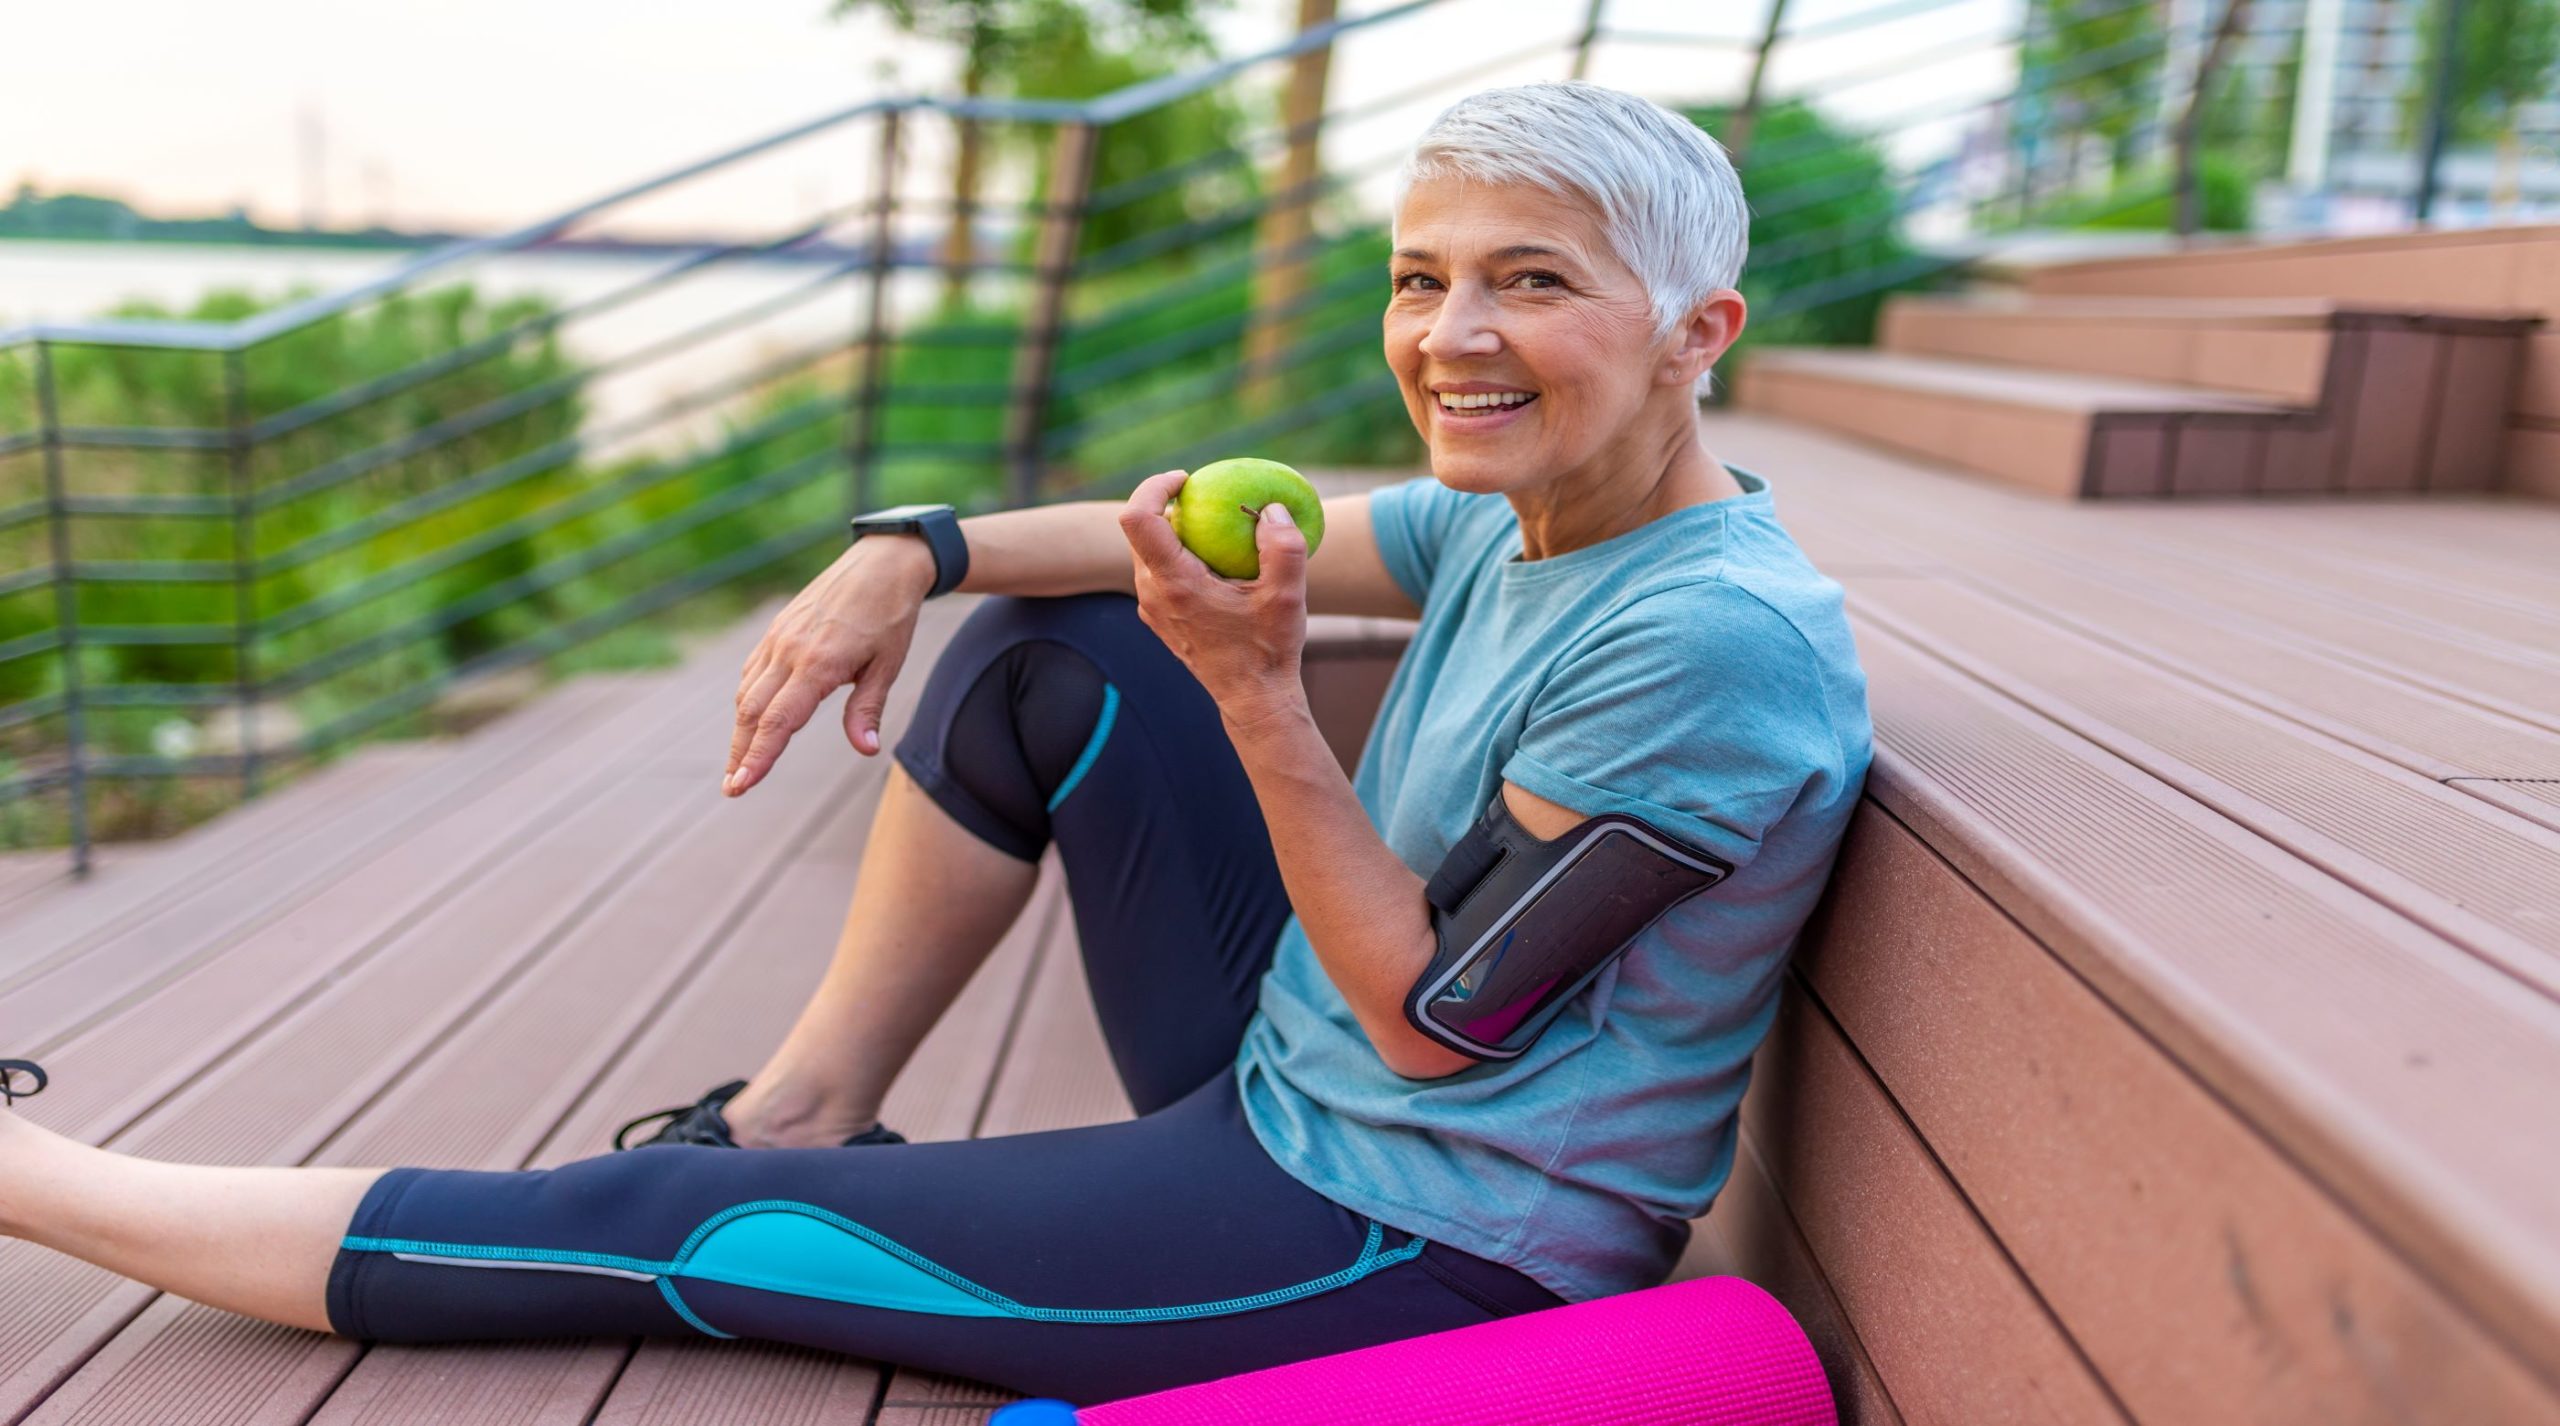 Arthritis: Exercise and Food for Your Joints<p><h2>[For Patients]</h2></p>